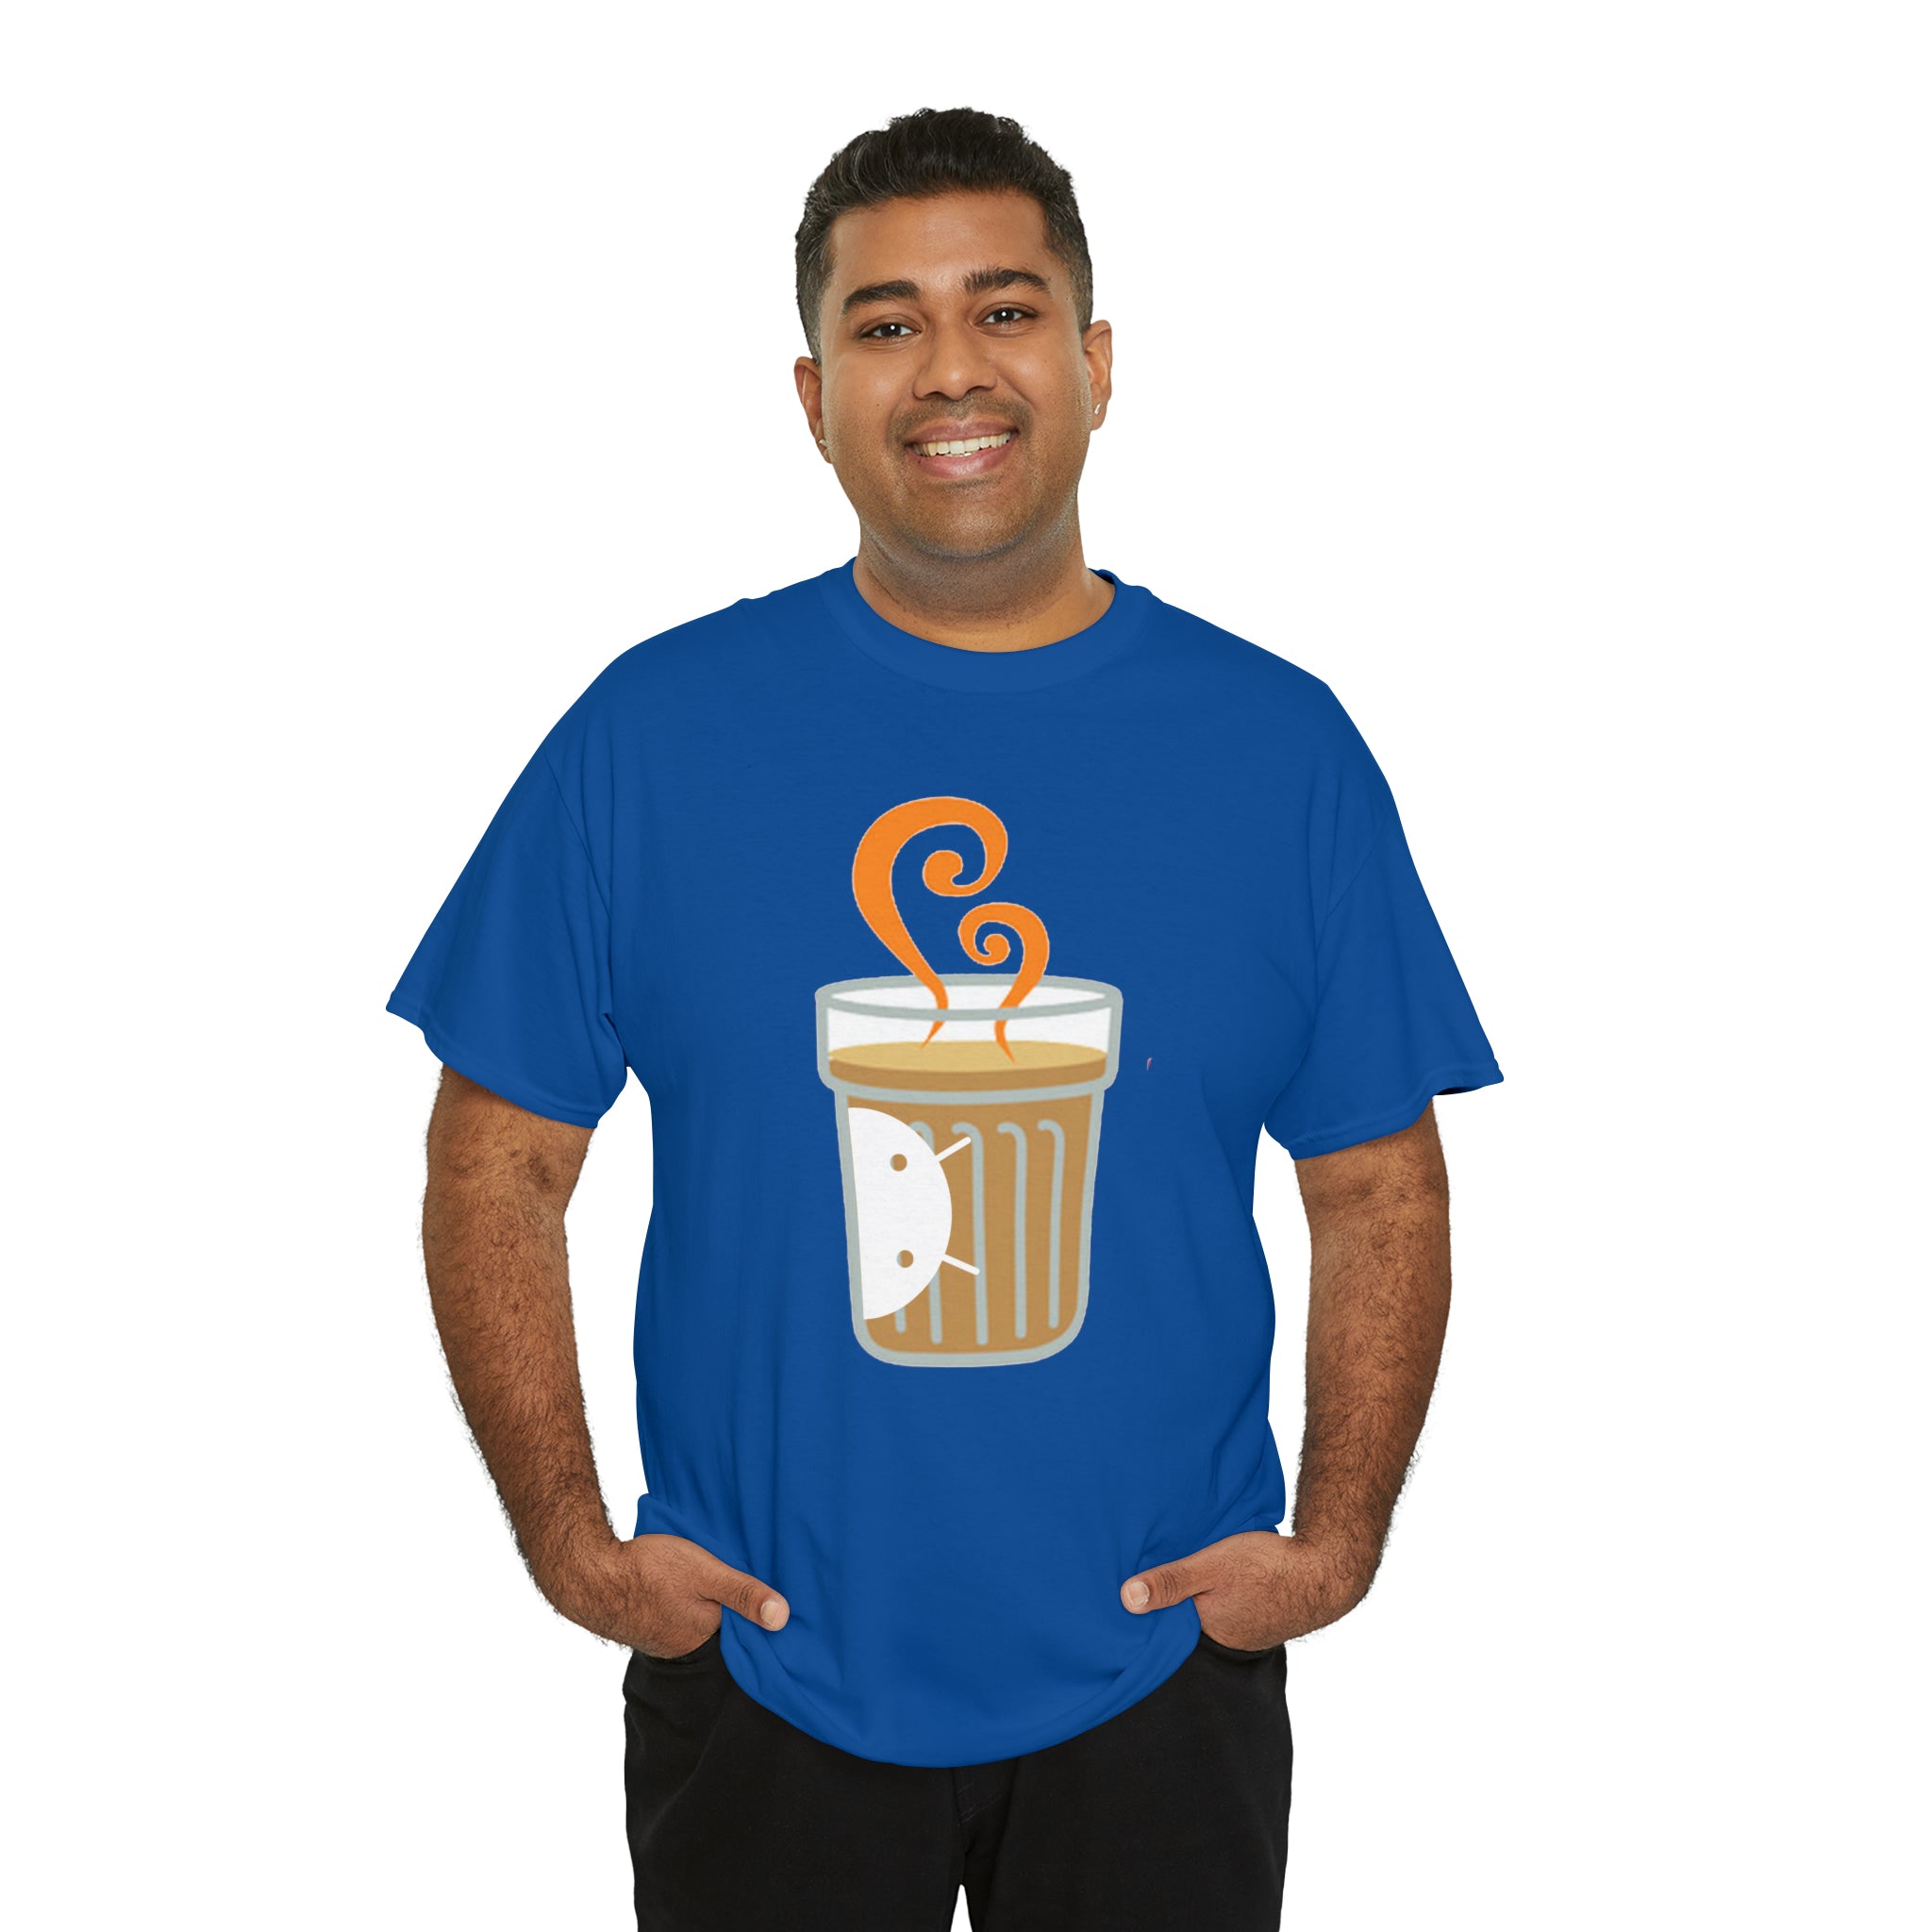 Android and Chai T-Shirt Design by C&C